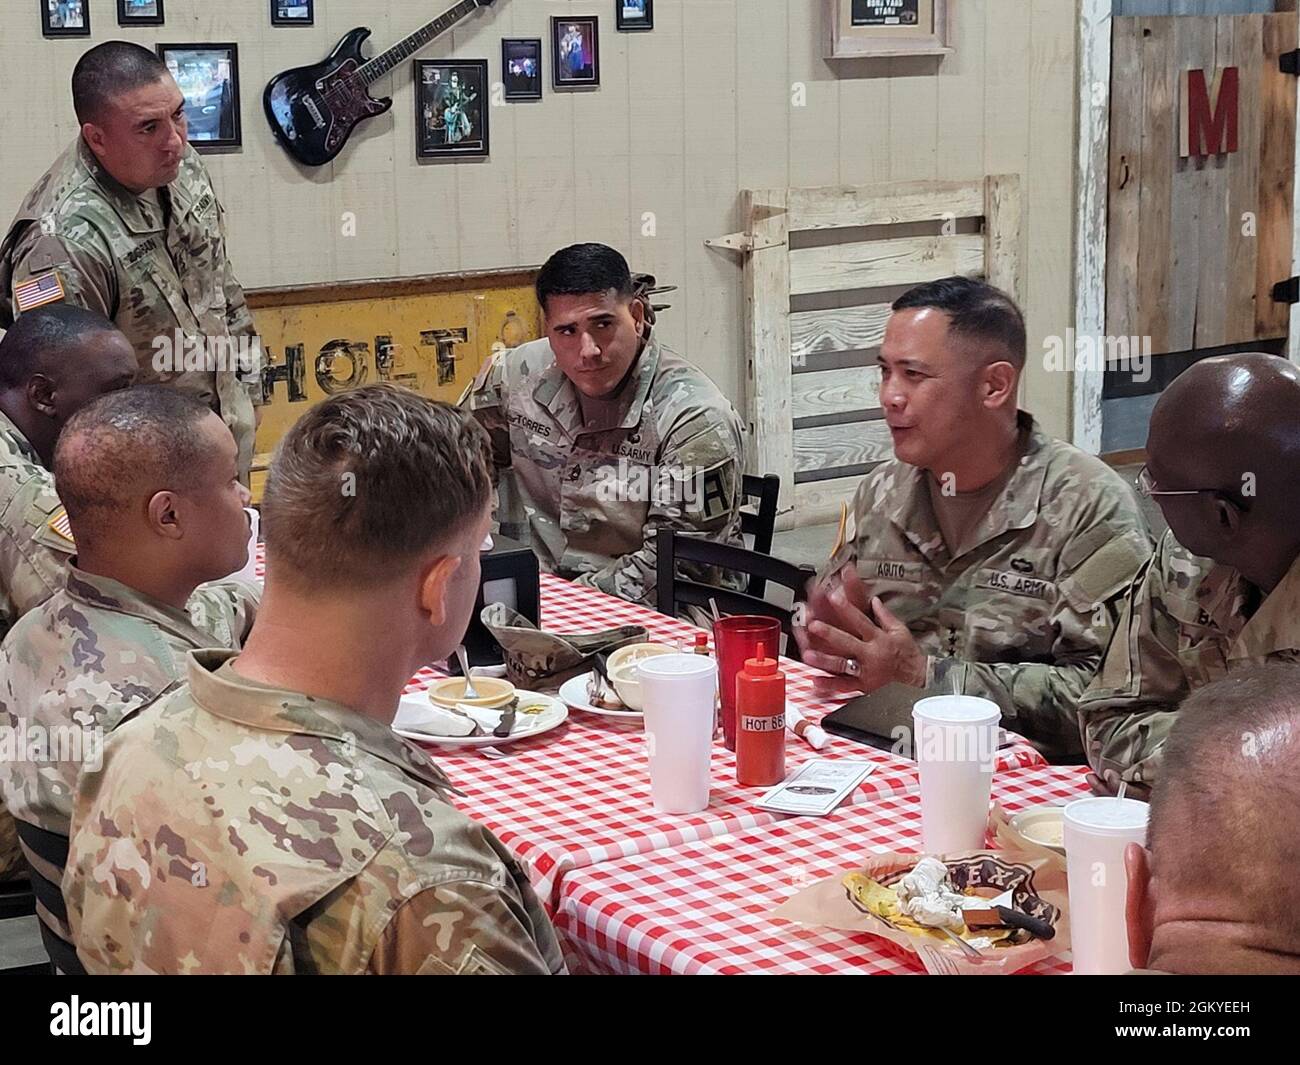 Lt. Gen. Antonio A. Aguto, commanding general of First Army (right), meets with OC/Ts from 120th Infantry Brigade and 166th Aviation Brigade over a lunch at Barebones BBQ restaurant in Gatesville, Texas on July 28, 2021. Topics discussed included the commanding general's interest in the daily work of the OC/Ts, Soldier welfare, and shared Army training stories. Stock Photo